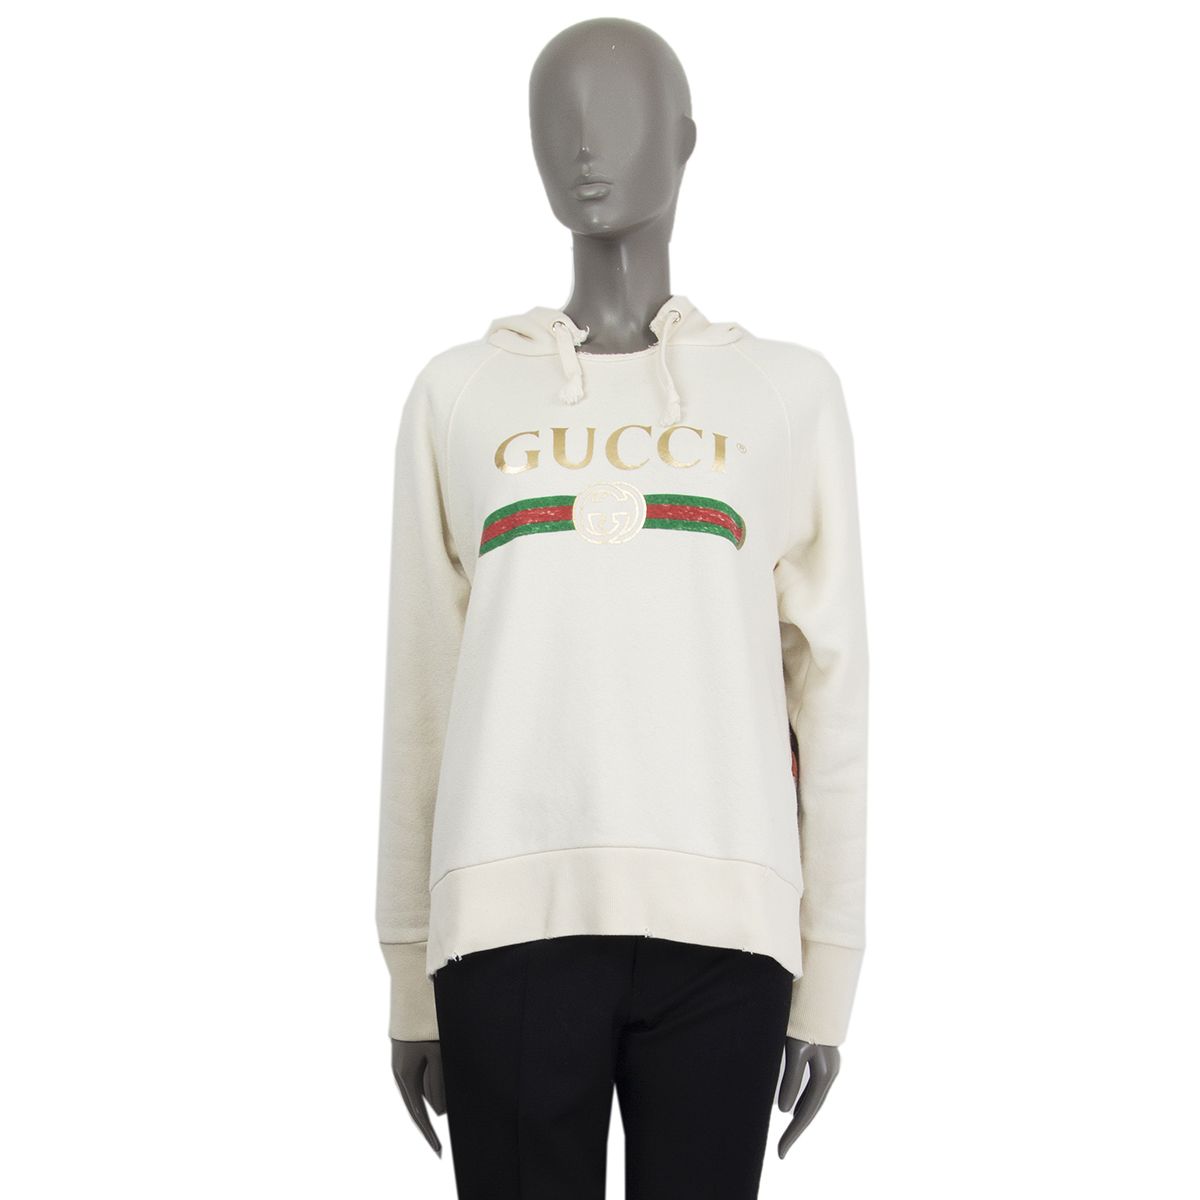 Gucci 'Blind For Love' Hoodie Off-White Cotton Jersey Resort